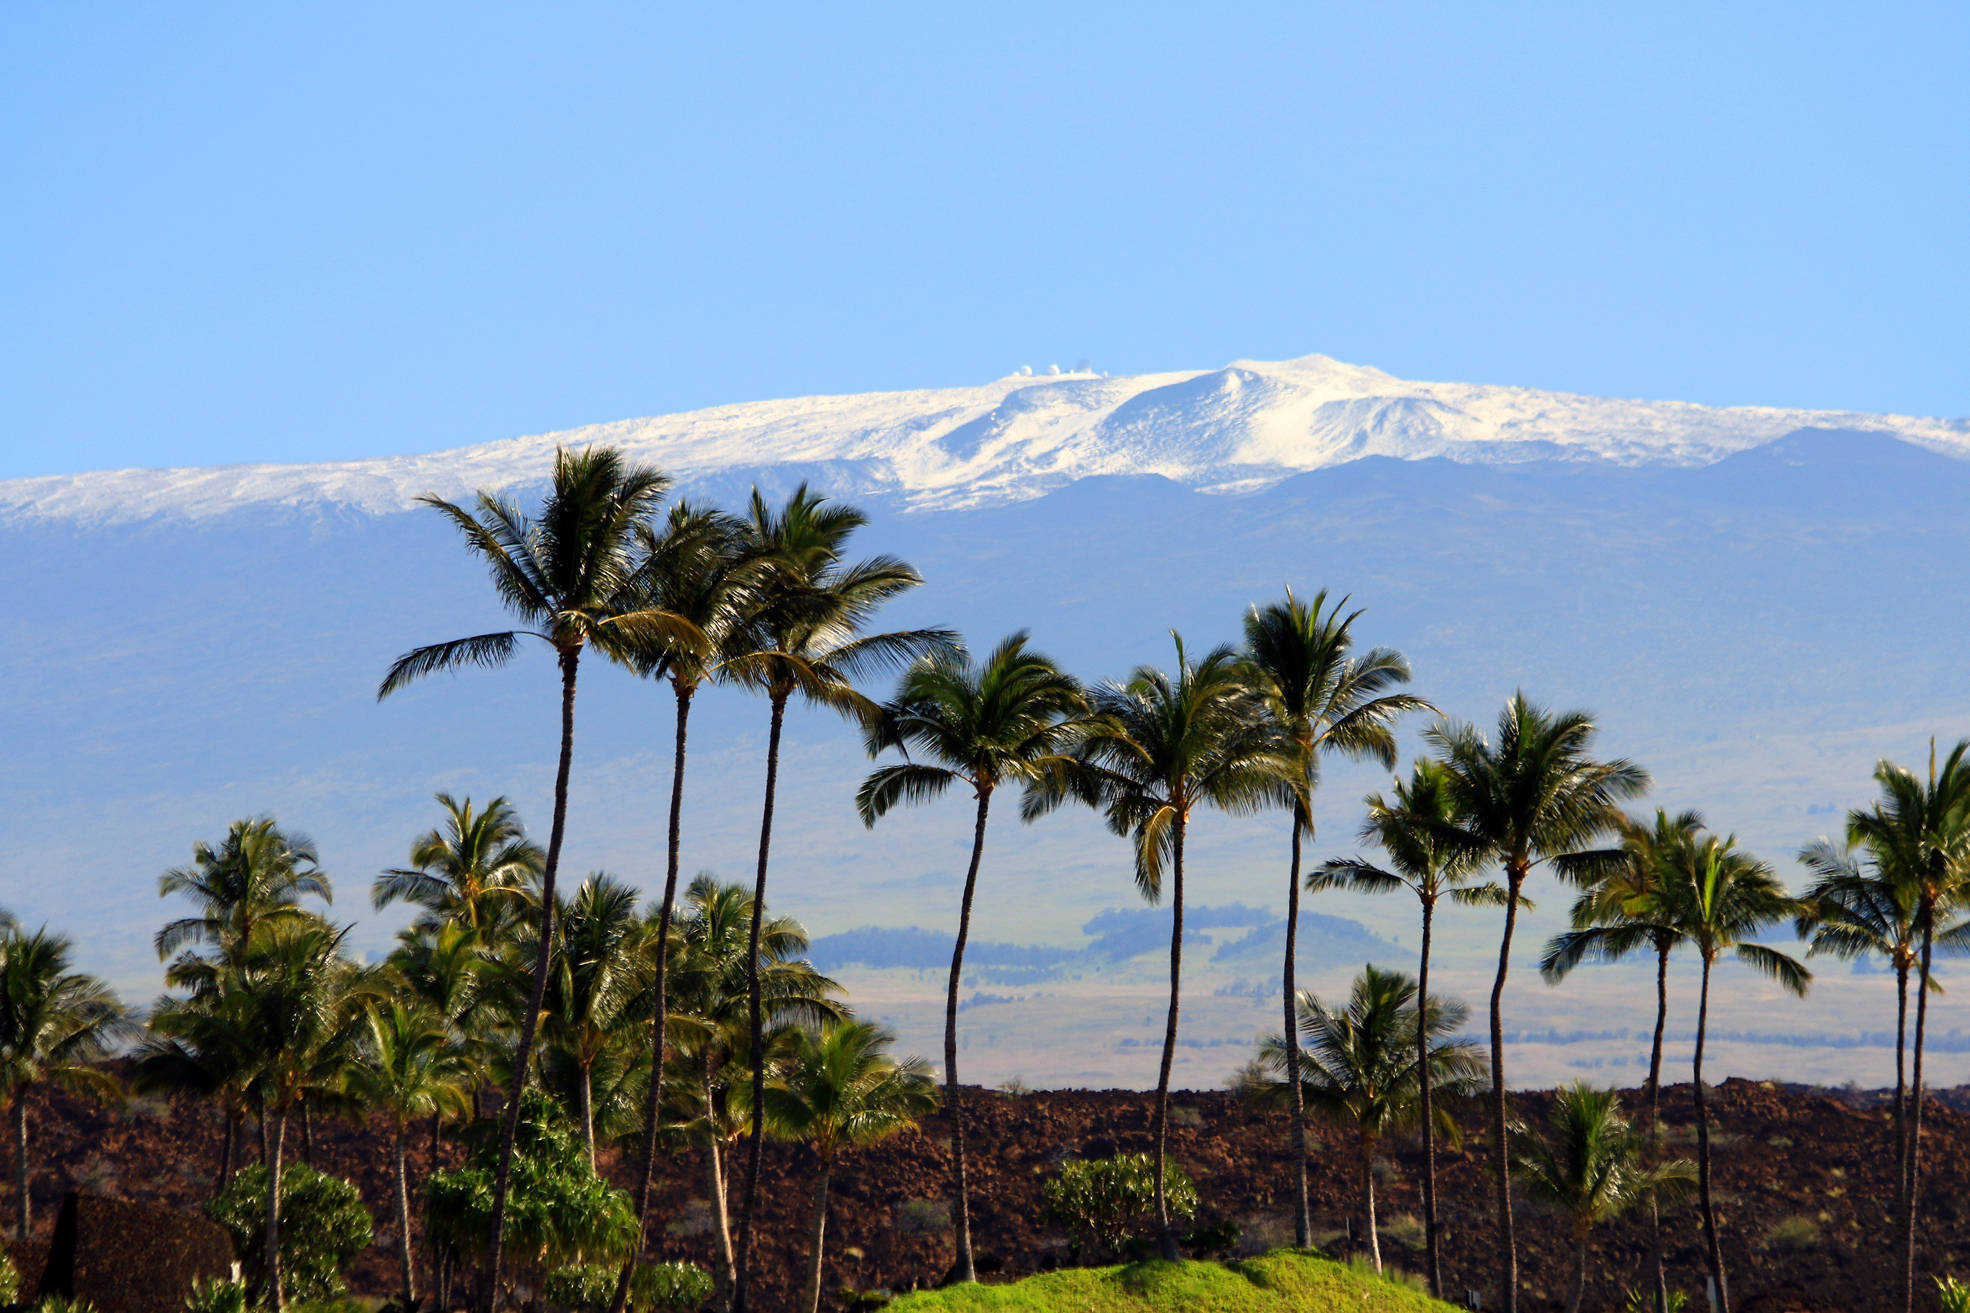 The Big Island's Snow-capped Mauna Kea with palm trees in front